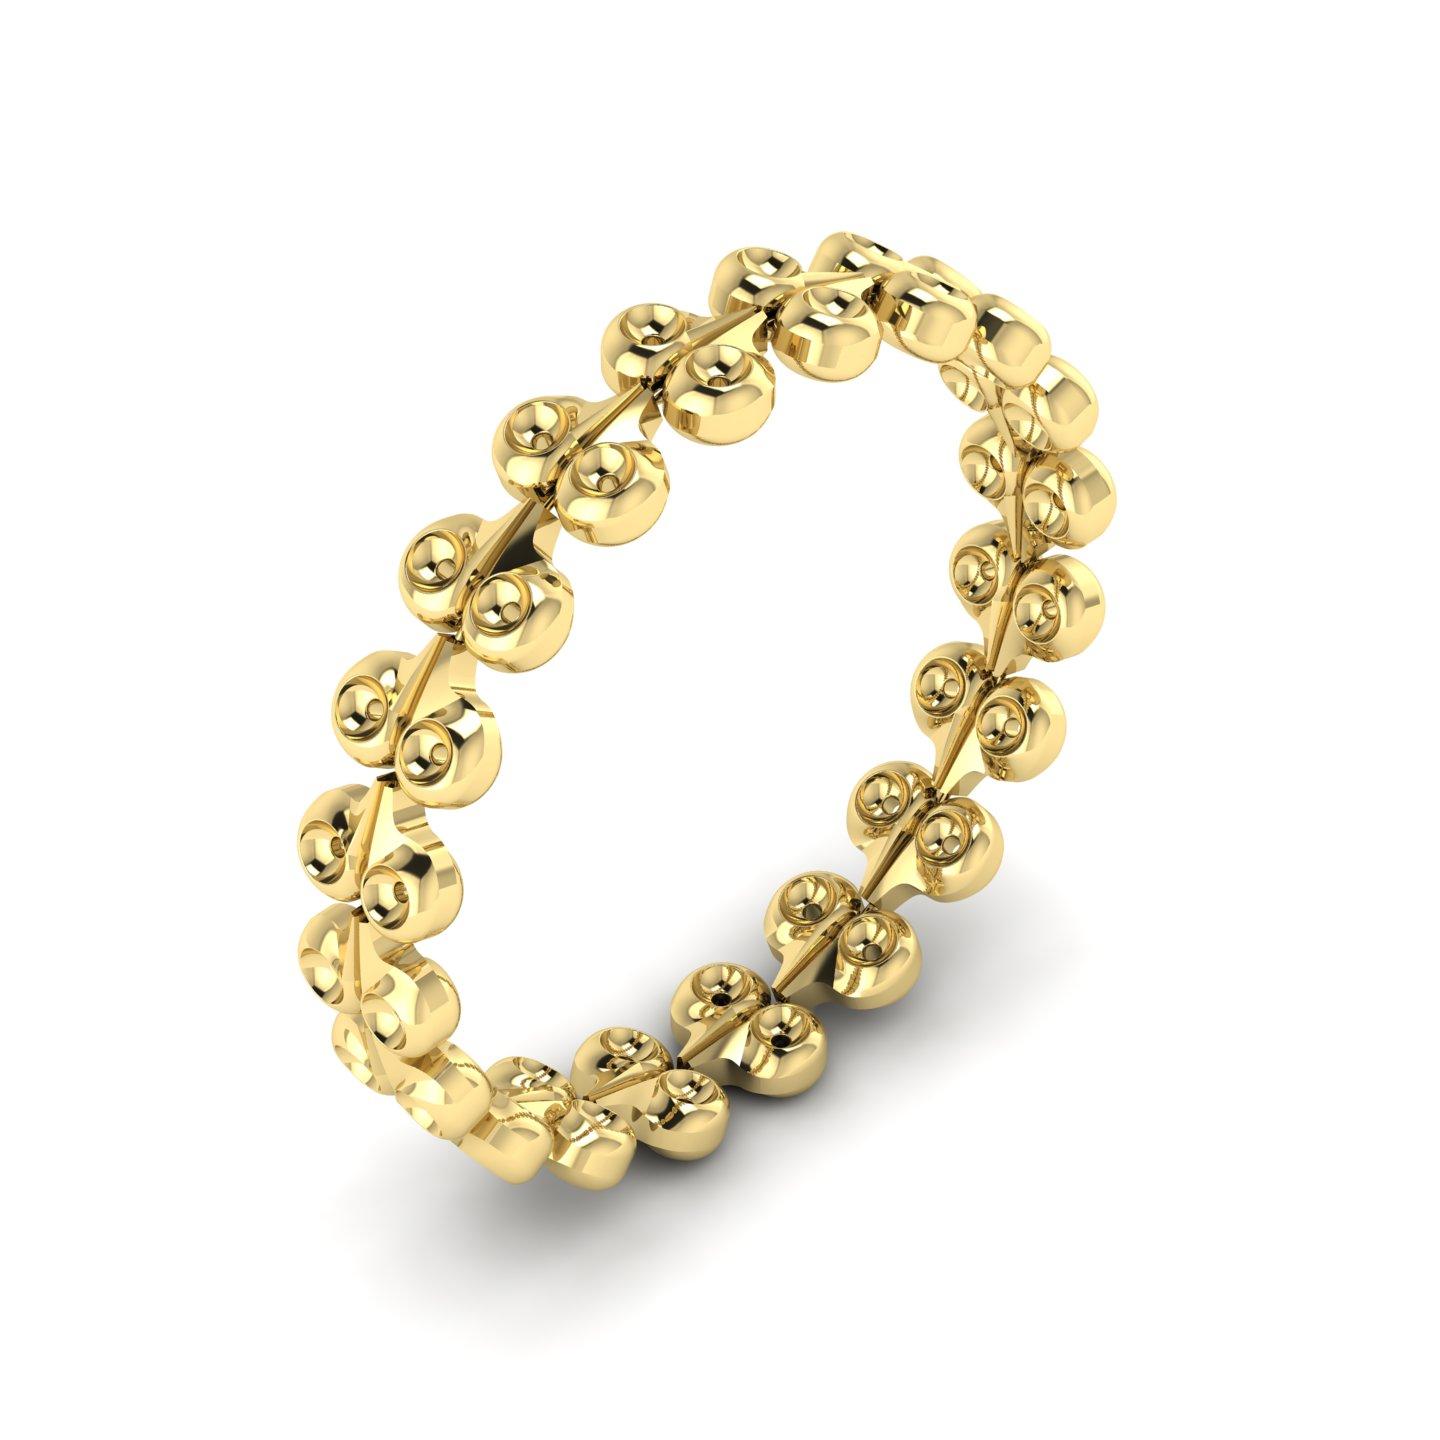 22 Karat Yellow Gold Mycenaean-Inspired Lily Flower Link Bracelet by ROMAE Jewelry. Our incredible 